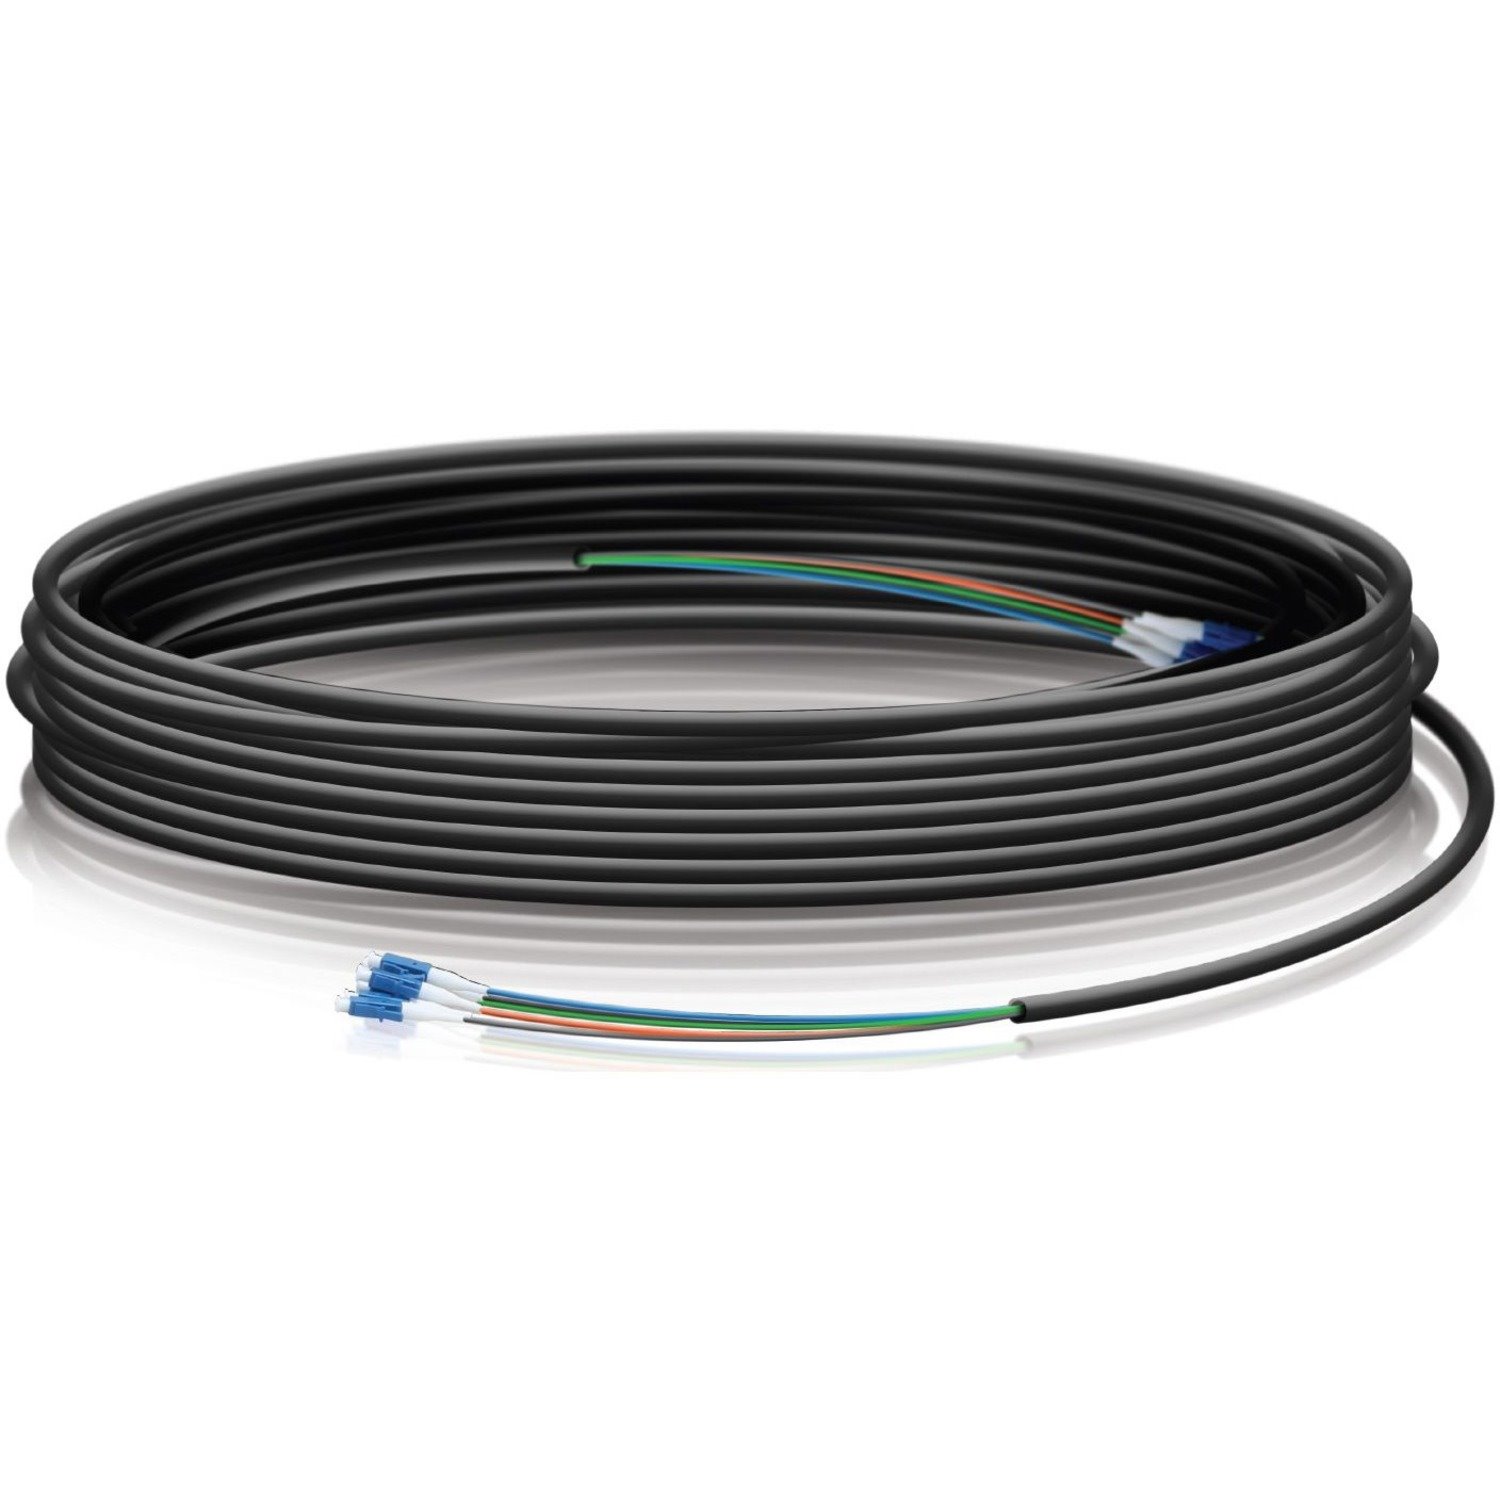 Ubiquiti 90 m Fibre Optic Network Cable for Network Device, Switch, Router